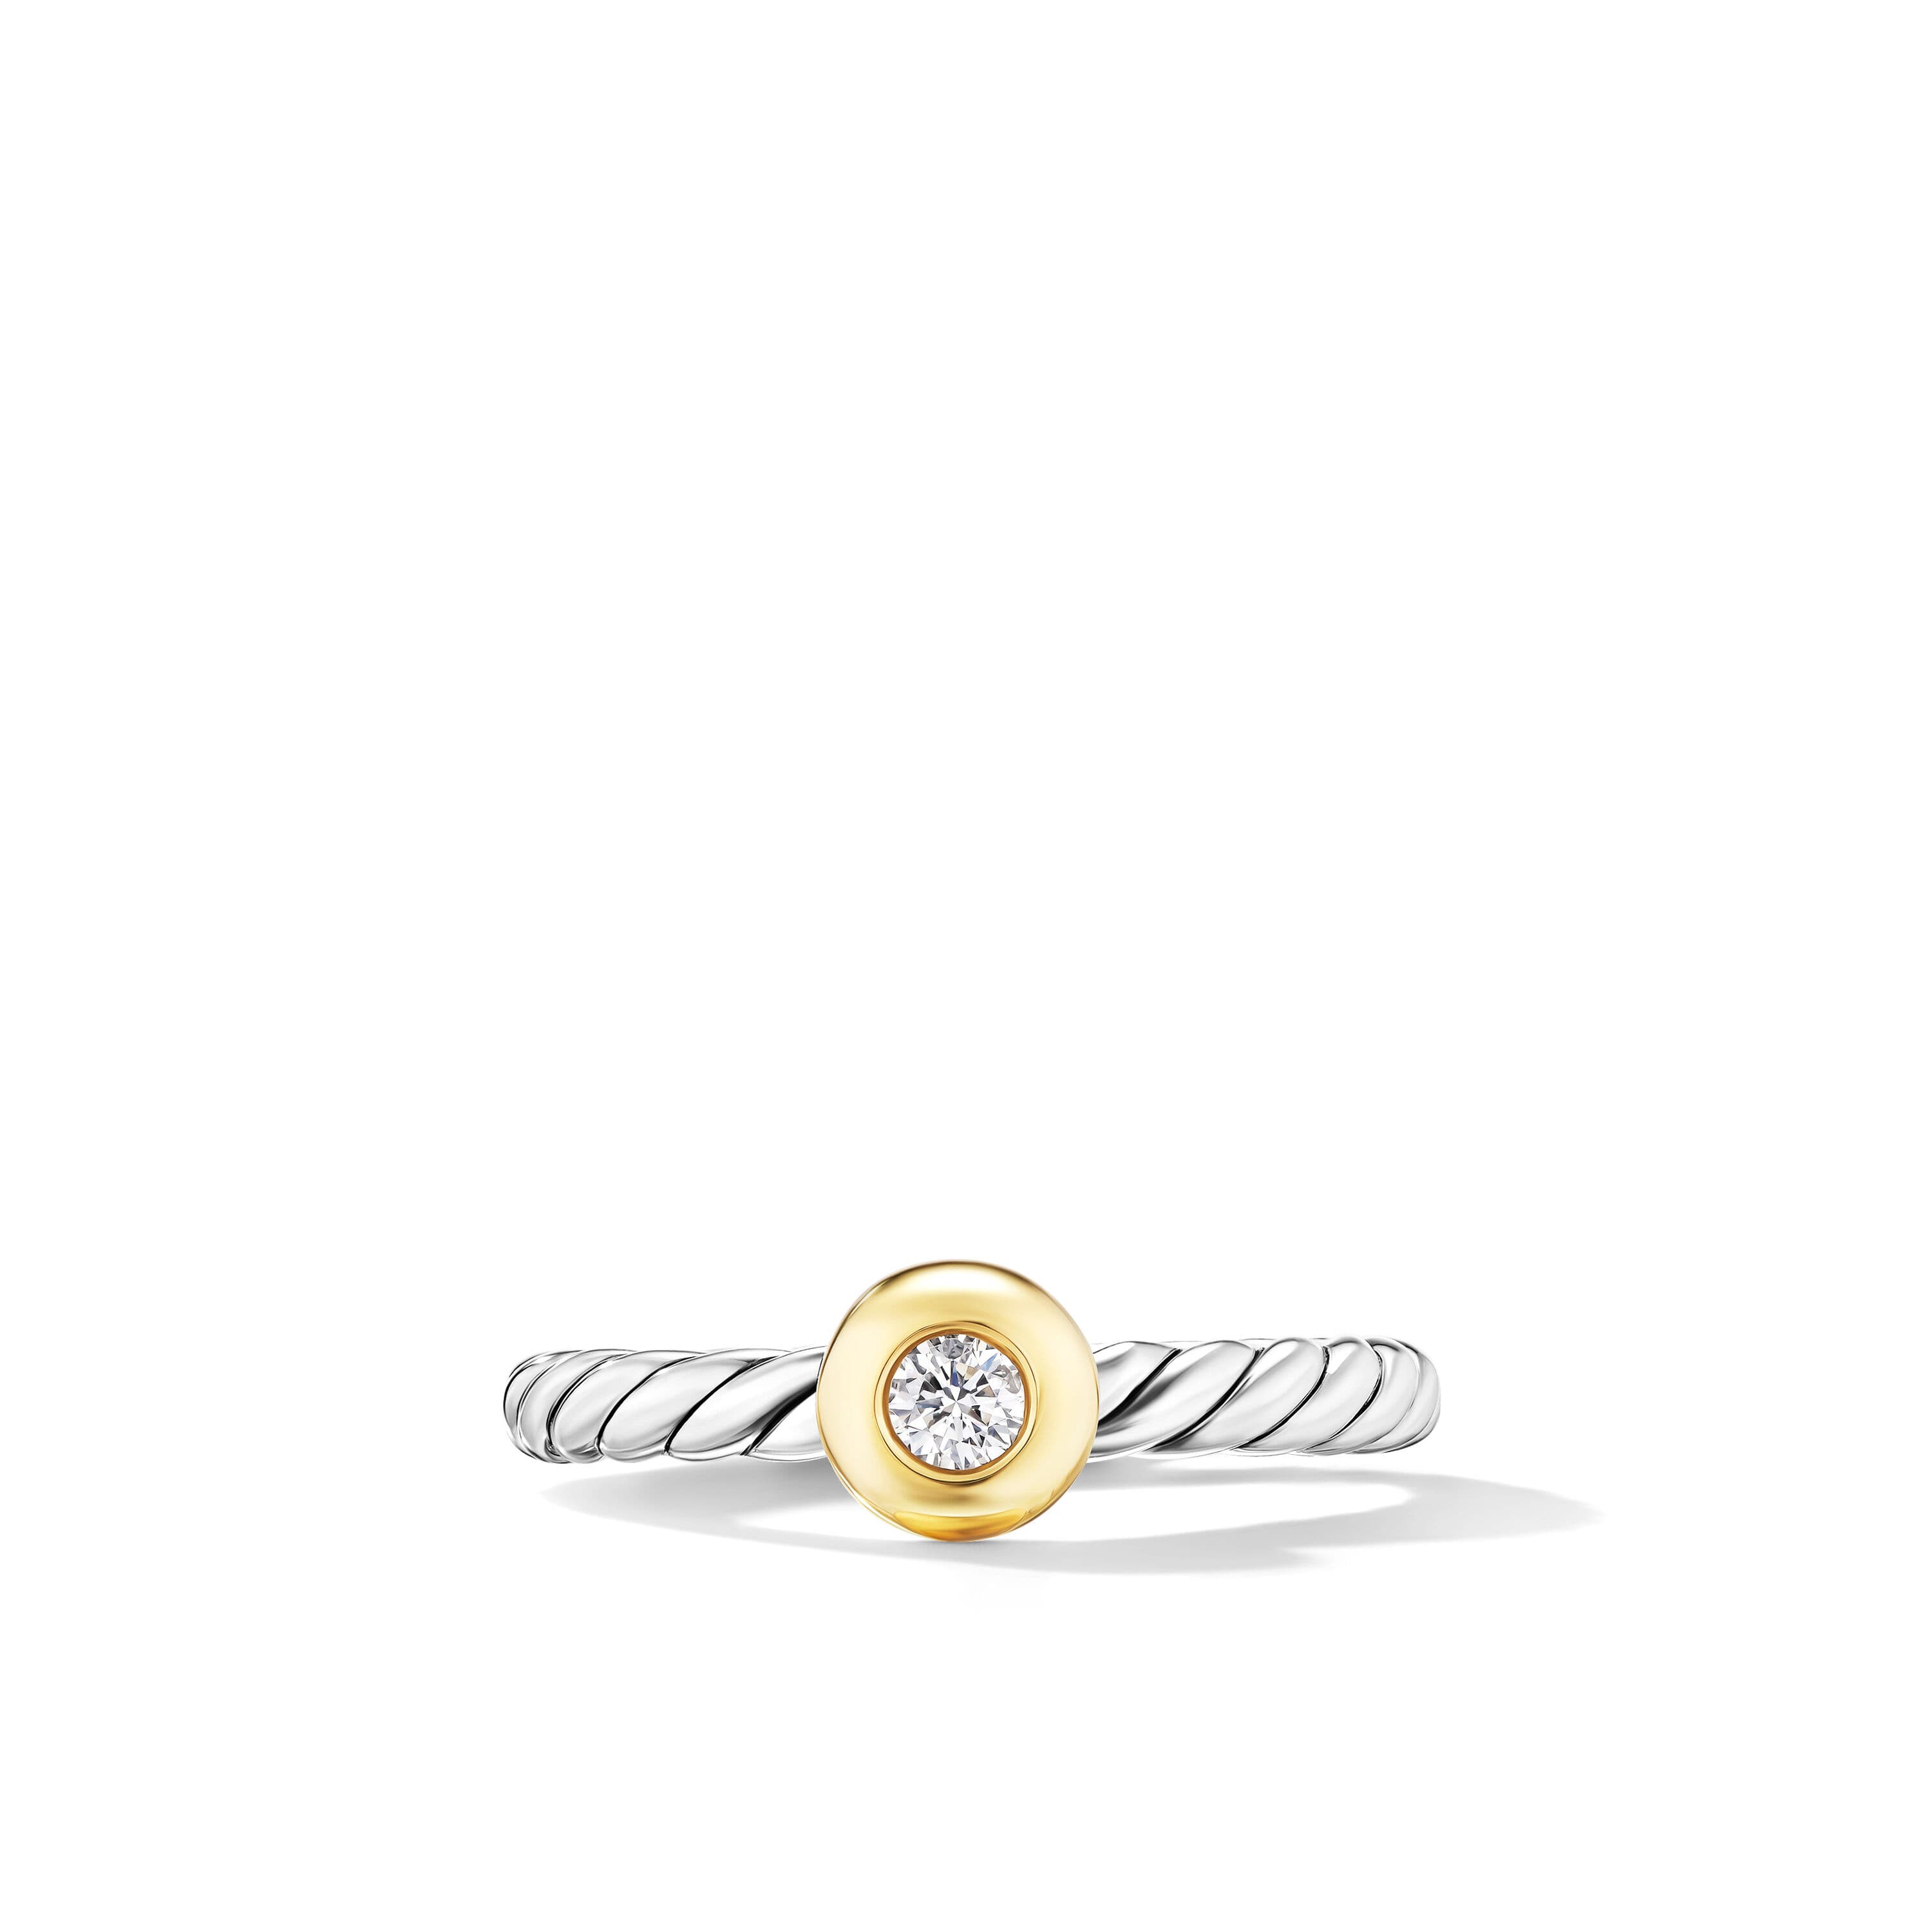 David Yurman Petite Cable Ring in Sterling Silver with 14K Yellow Gold and Diamond, Size 7 2